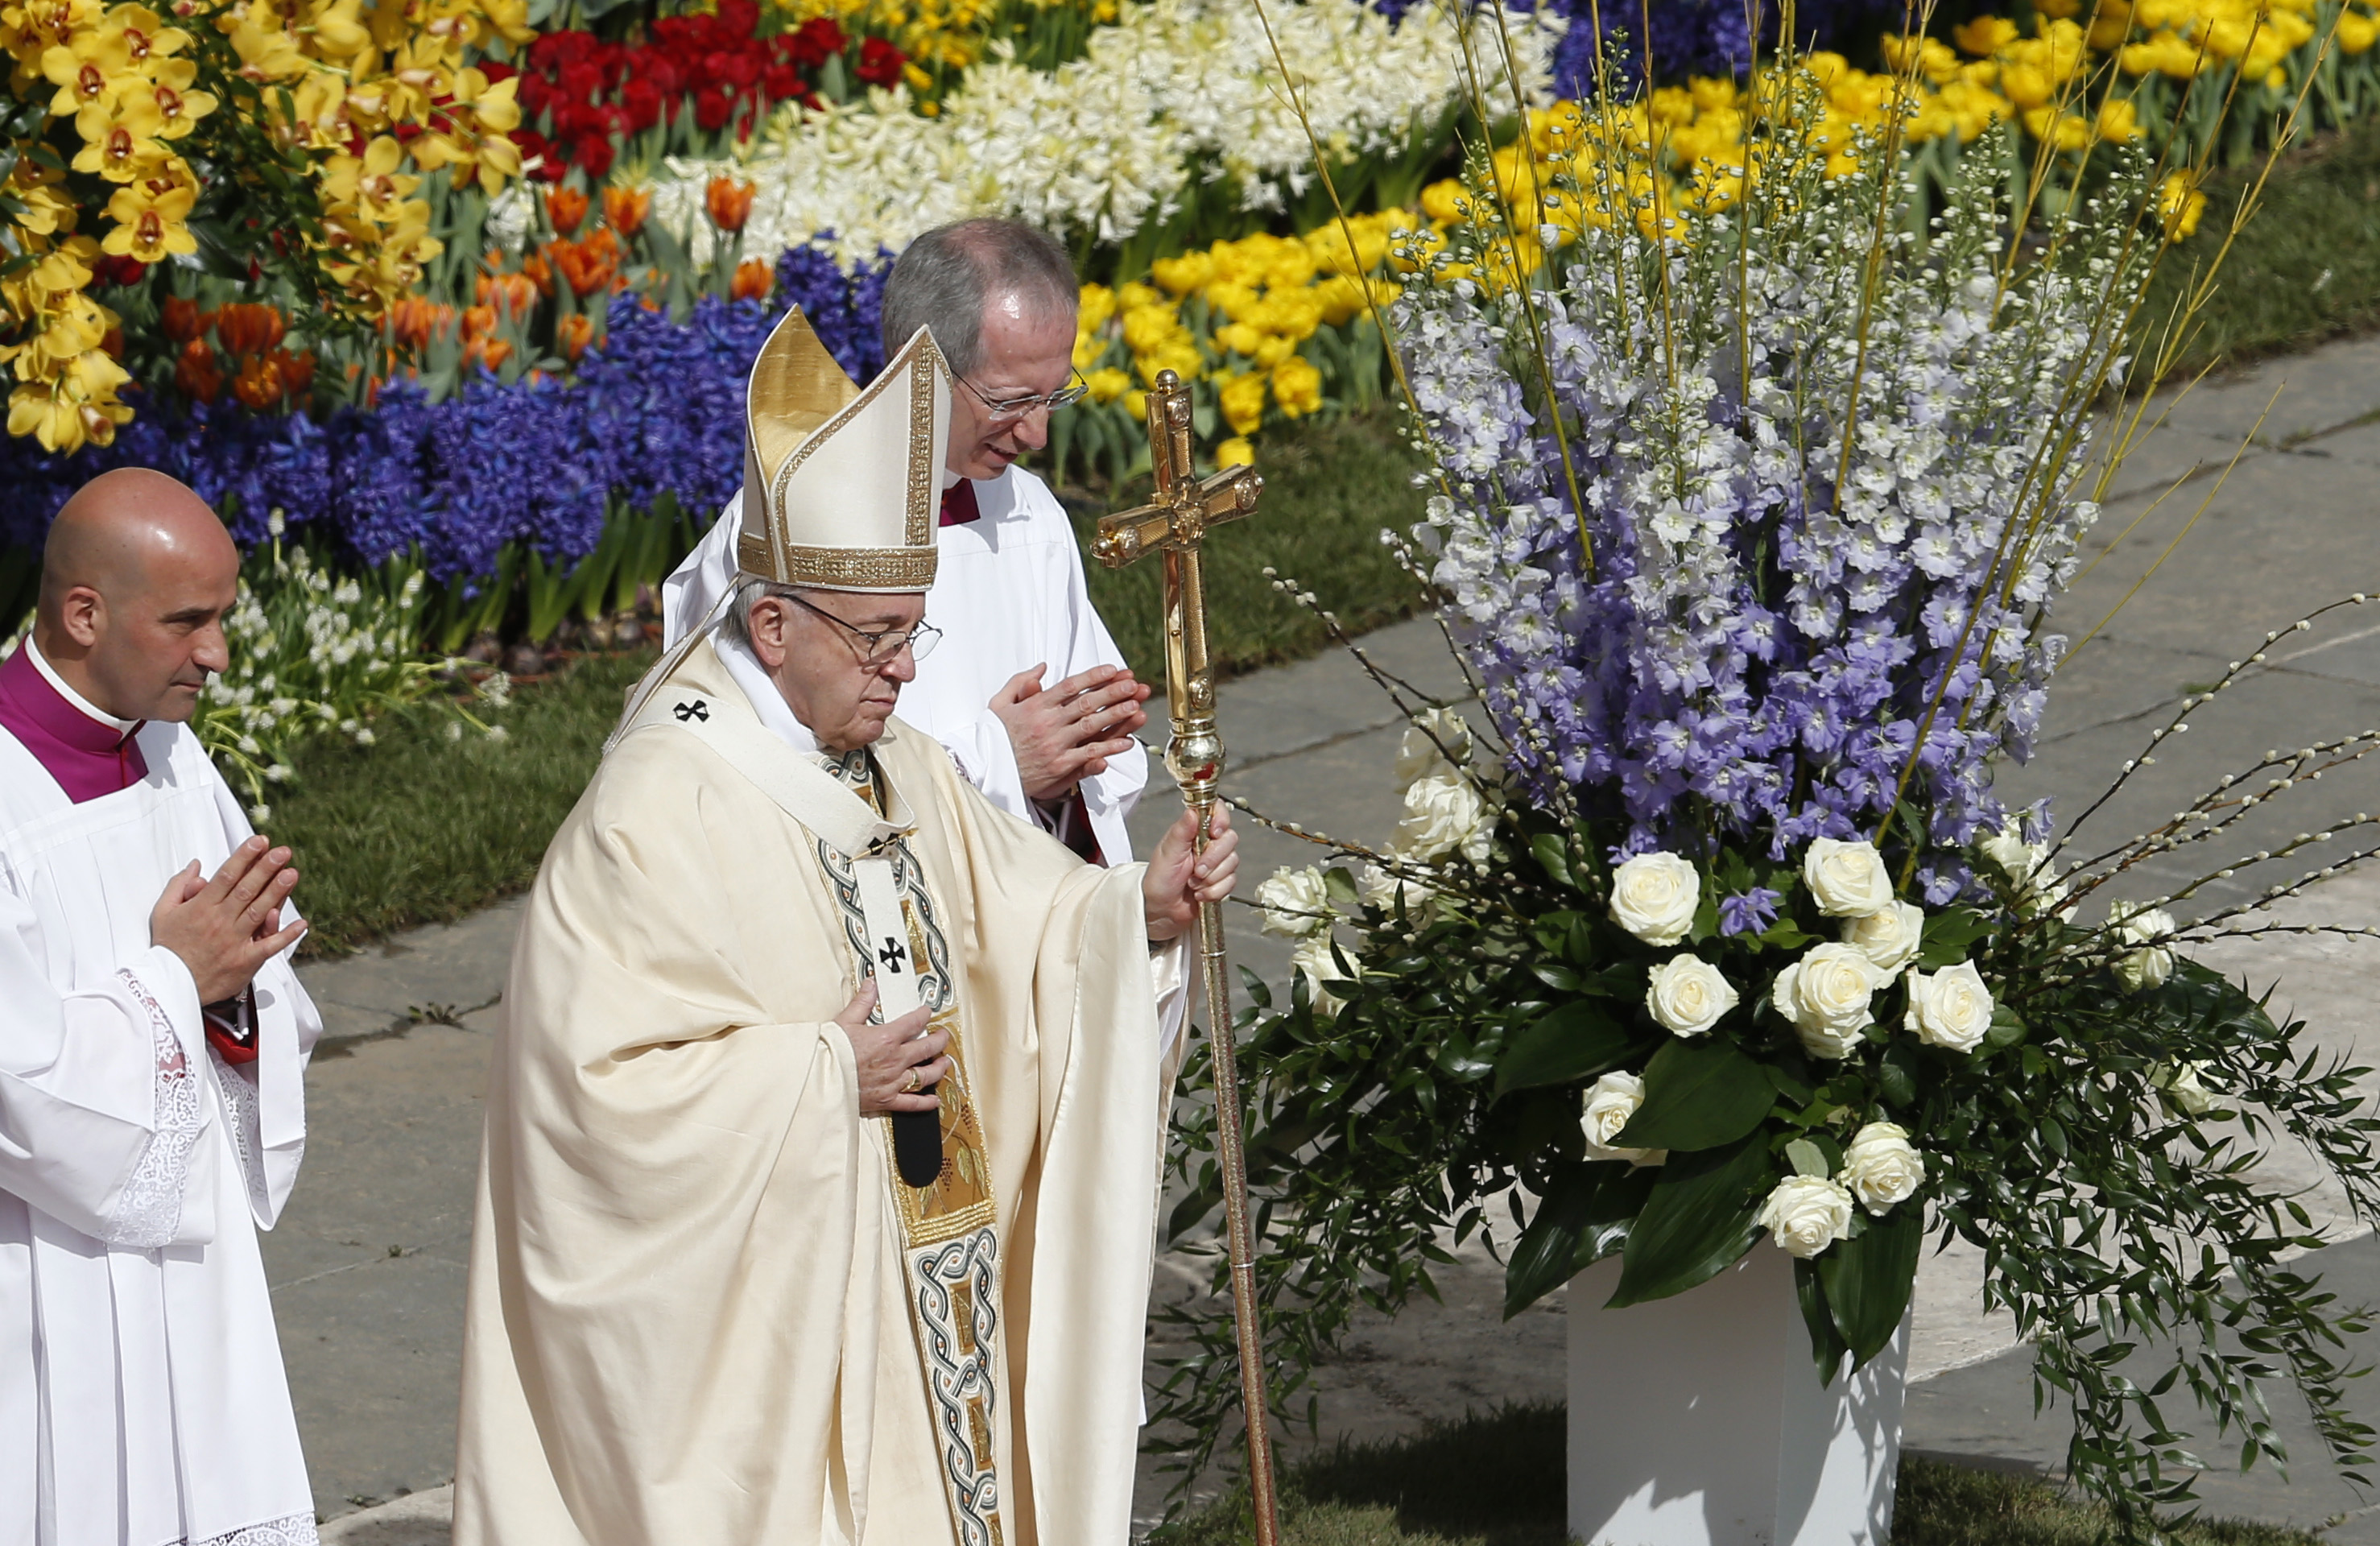 Vatican used lasers to protect Easter flowers from seagulls